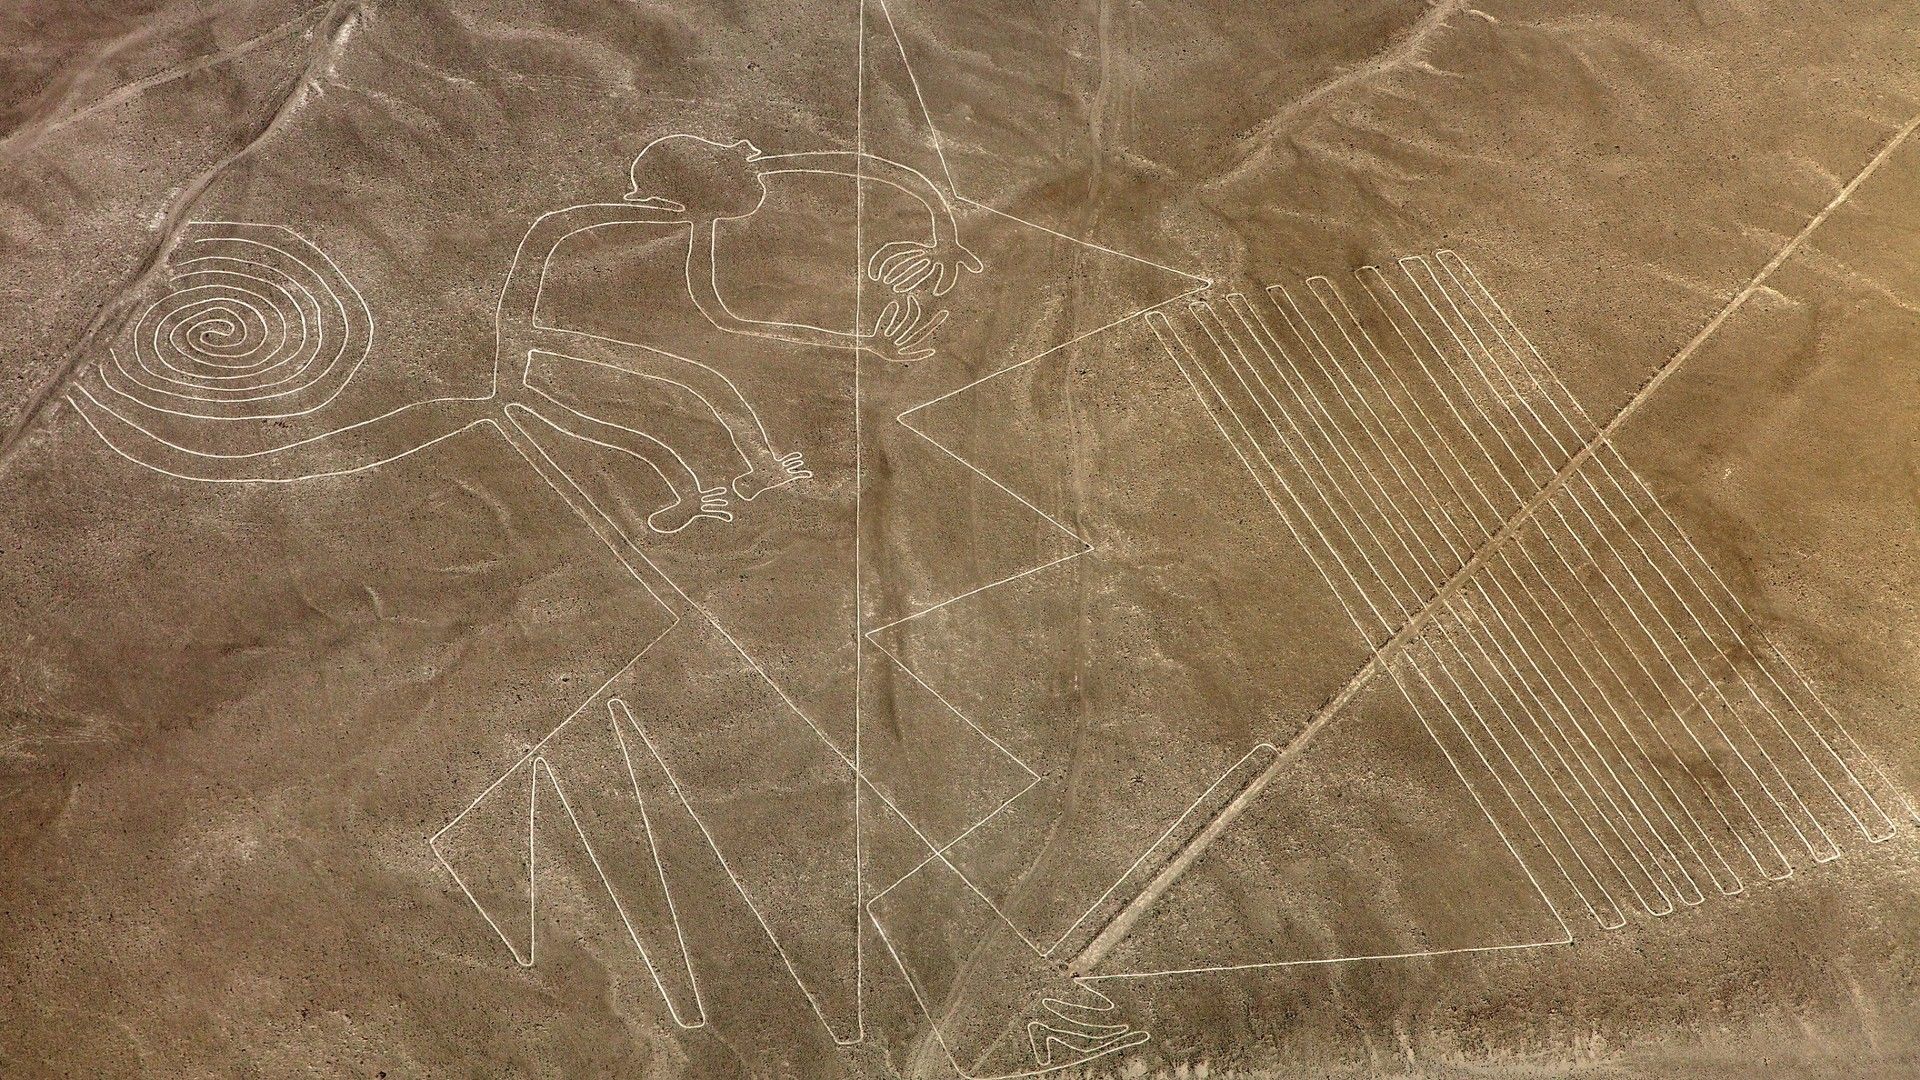 <p>                     Peru's rainforests are teeming with monkeys, so it's no surprise that ancient artists looked to the local fauna for inspiration. However, Maria Reiche, a German archaeologist and astronomer who studied the Nazca Lines extensively, proposed that the coil-tailed mammal represented the constellation Ursa Major, also known as the "Great Bear," according to The Independent. Over time, experts concluded that the monkey was never used for studying the cosmos, but Reiche's proposal sparked new interest in the geoglyphs.                   </p>